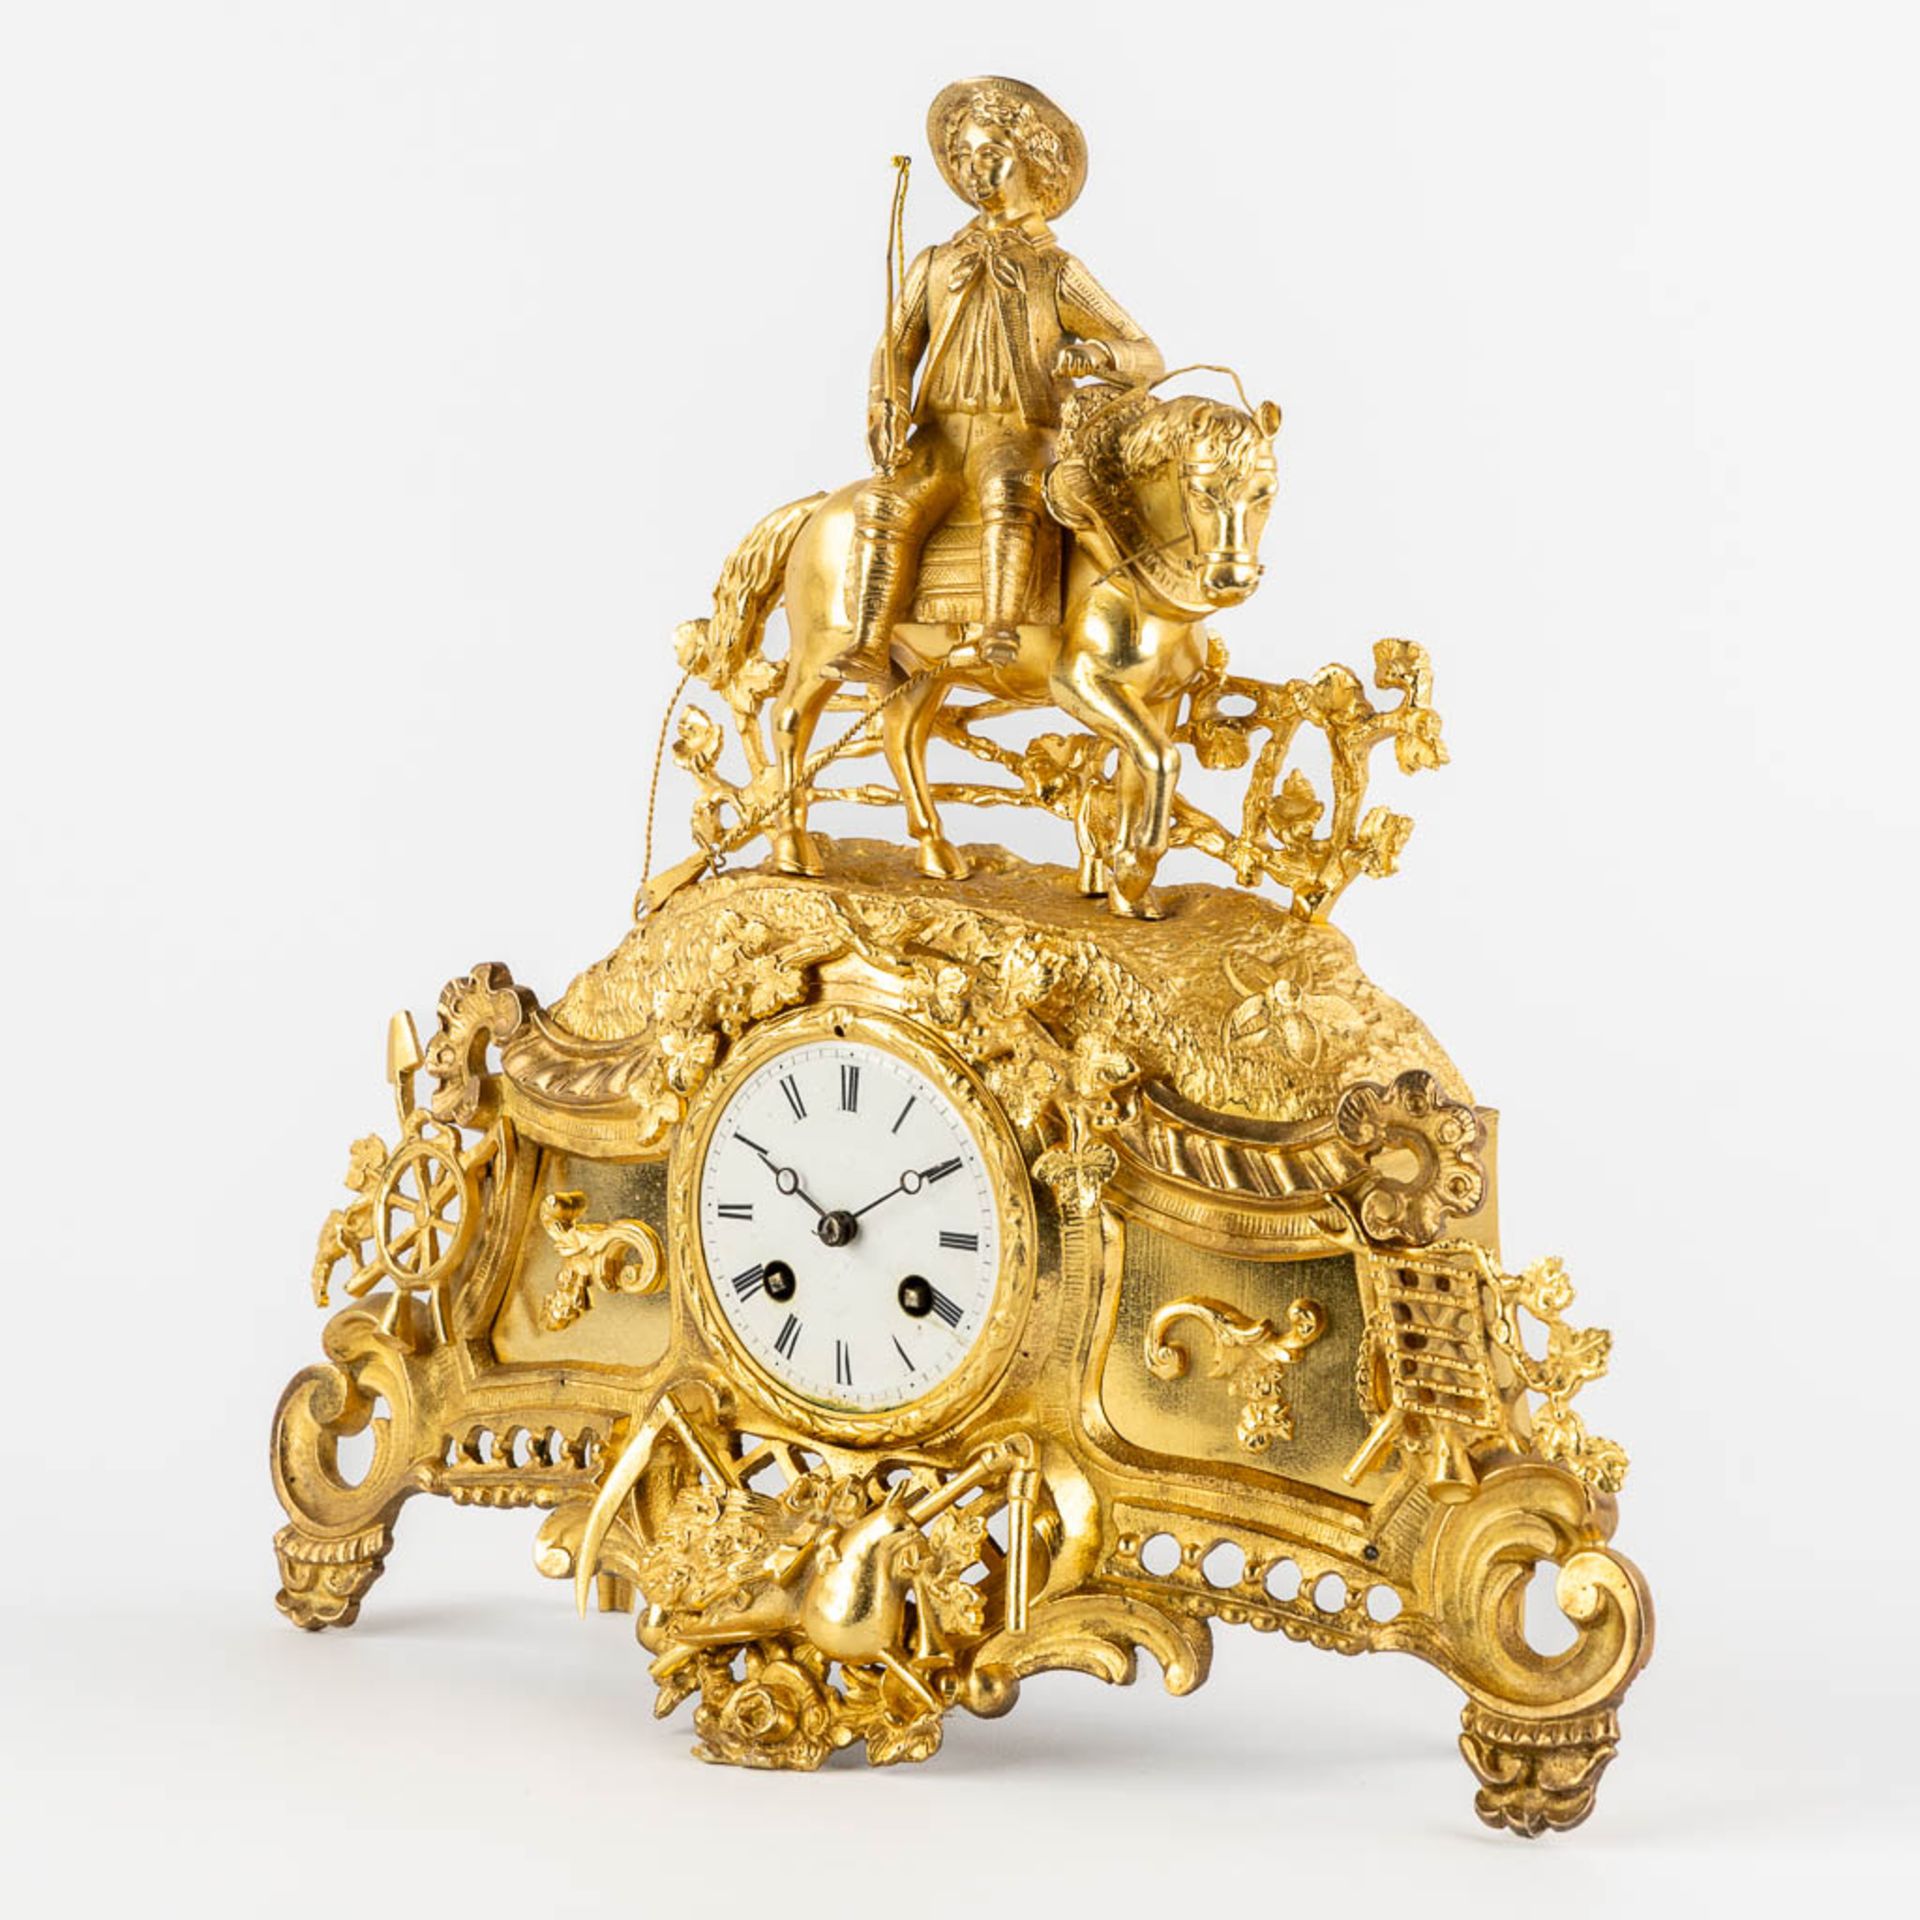 A mantle clock with a 'Horse Rider', gilt bronze. France, 19th C. (L:11,5 x W:38 x H:37 cm) - Image 3 of 12